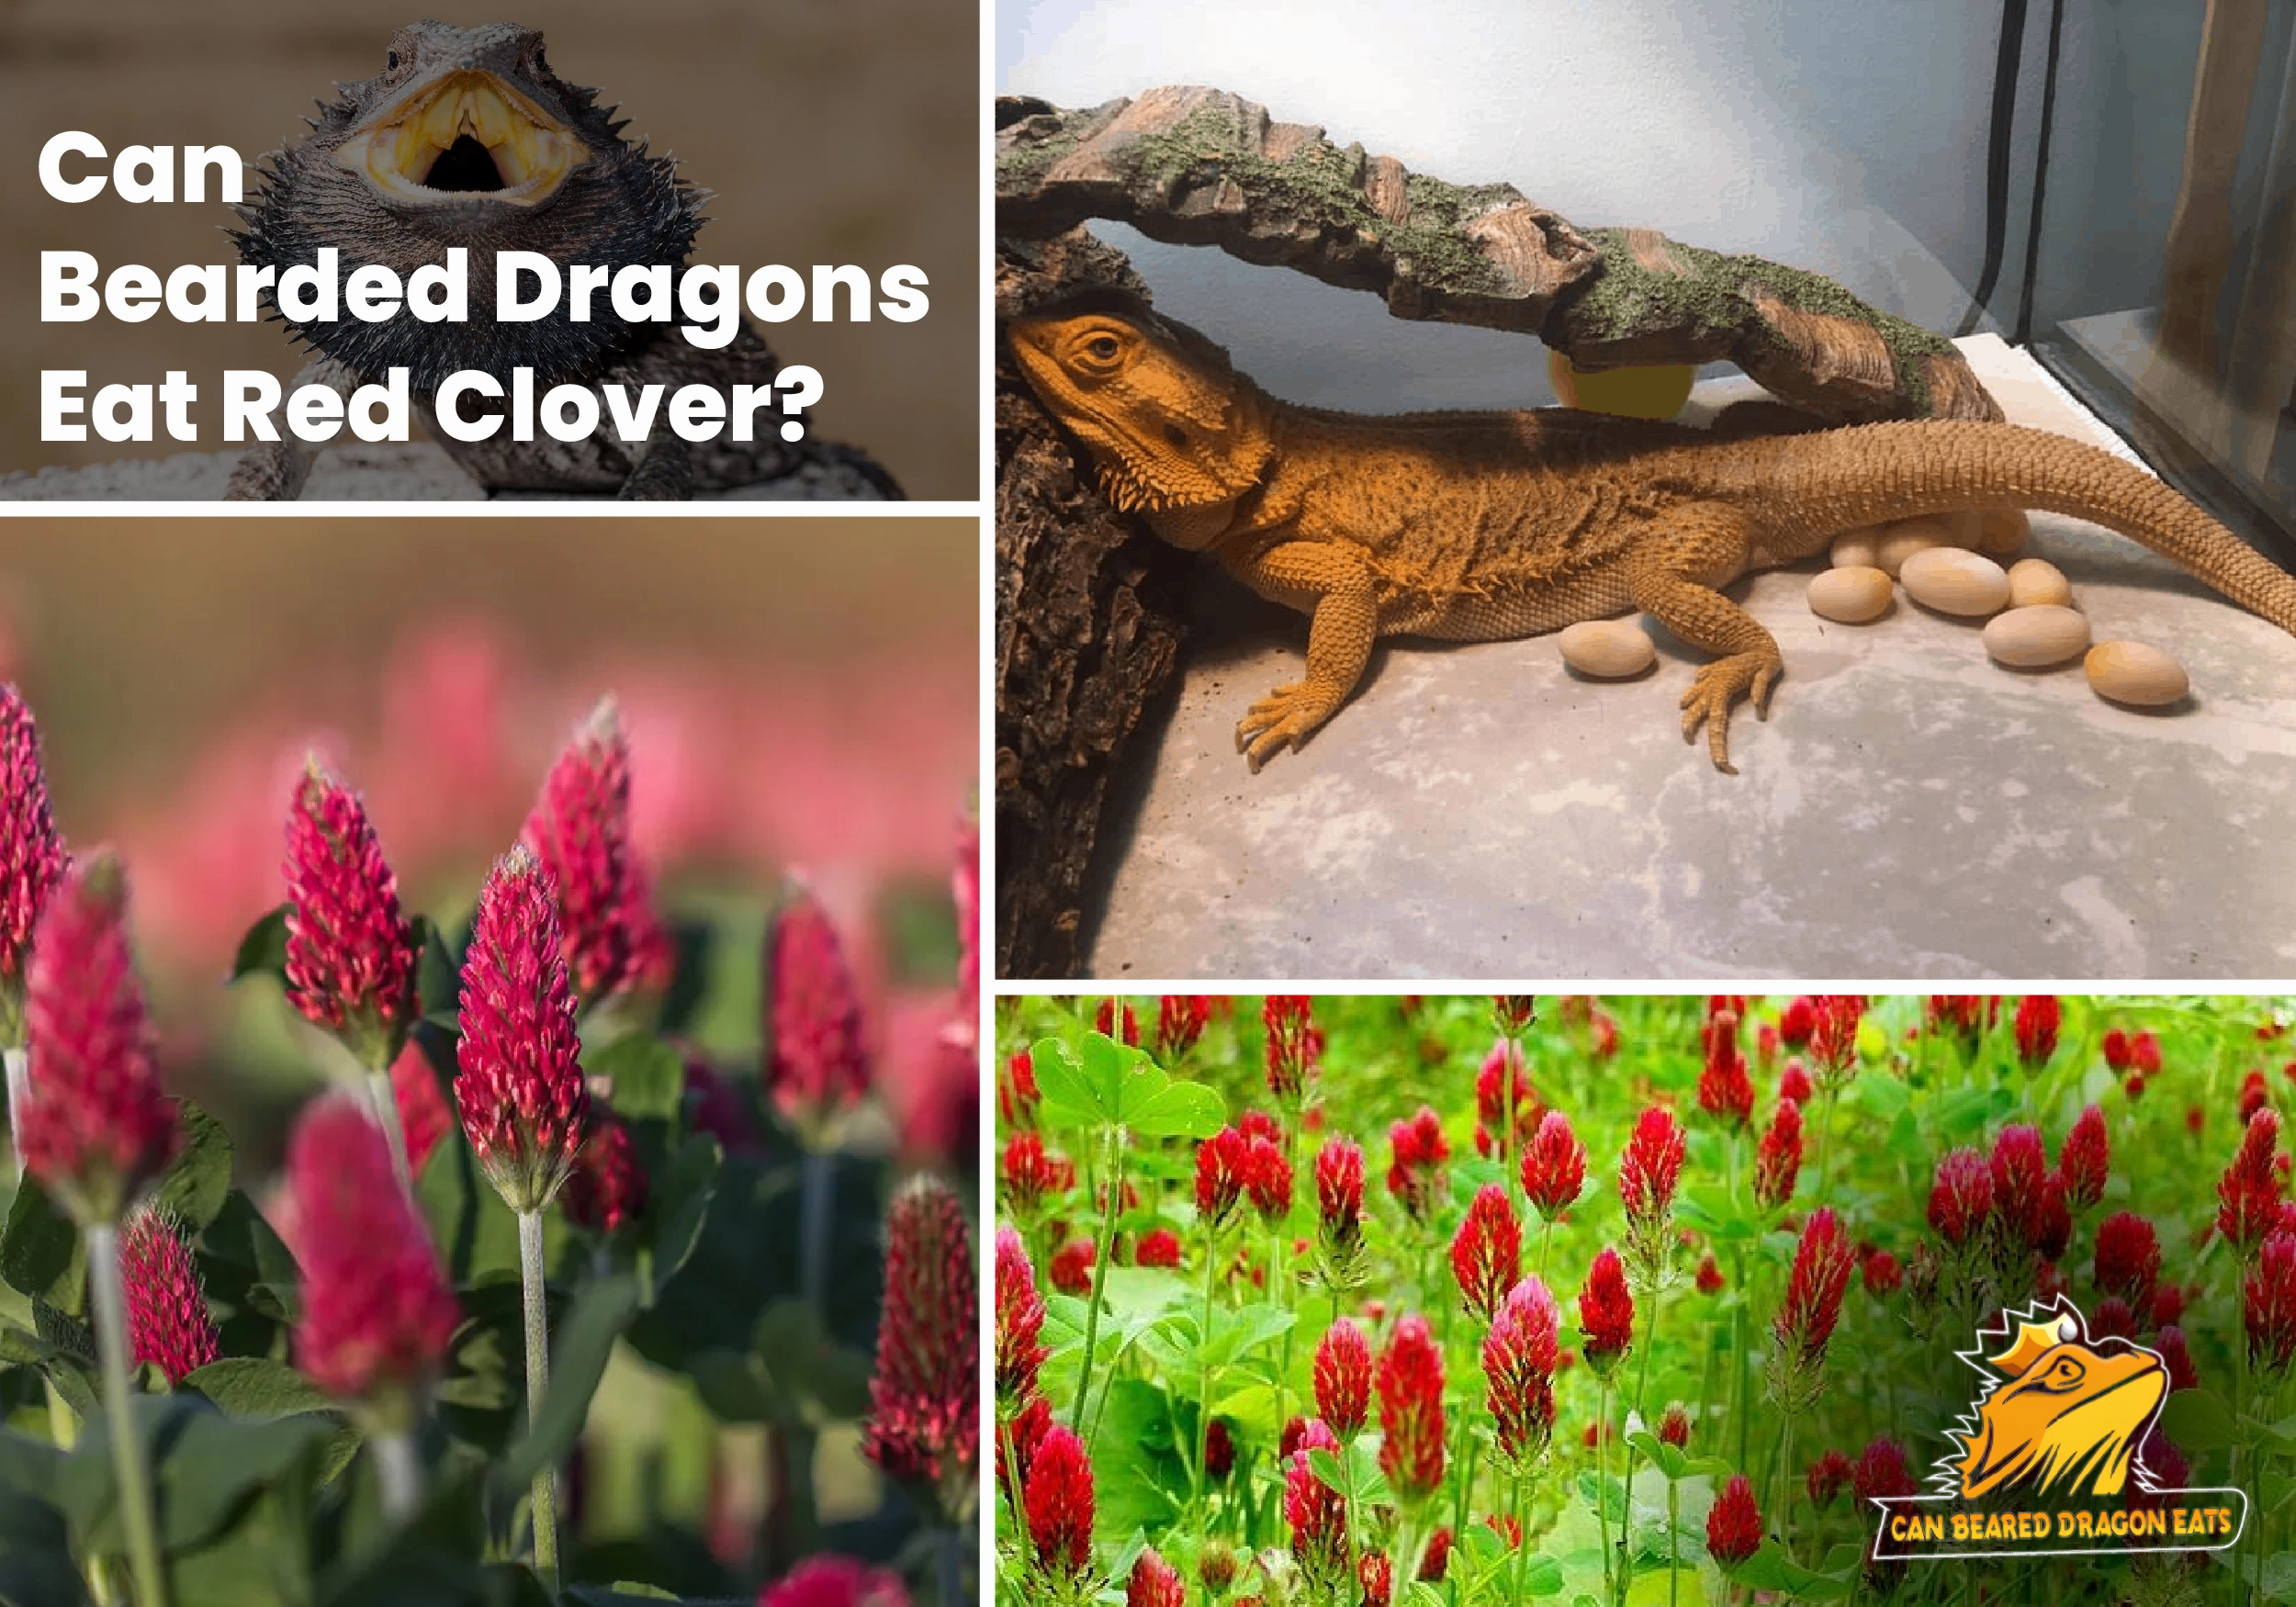 Can Bearded Dragons Eat Red Clover